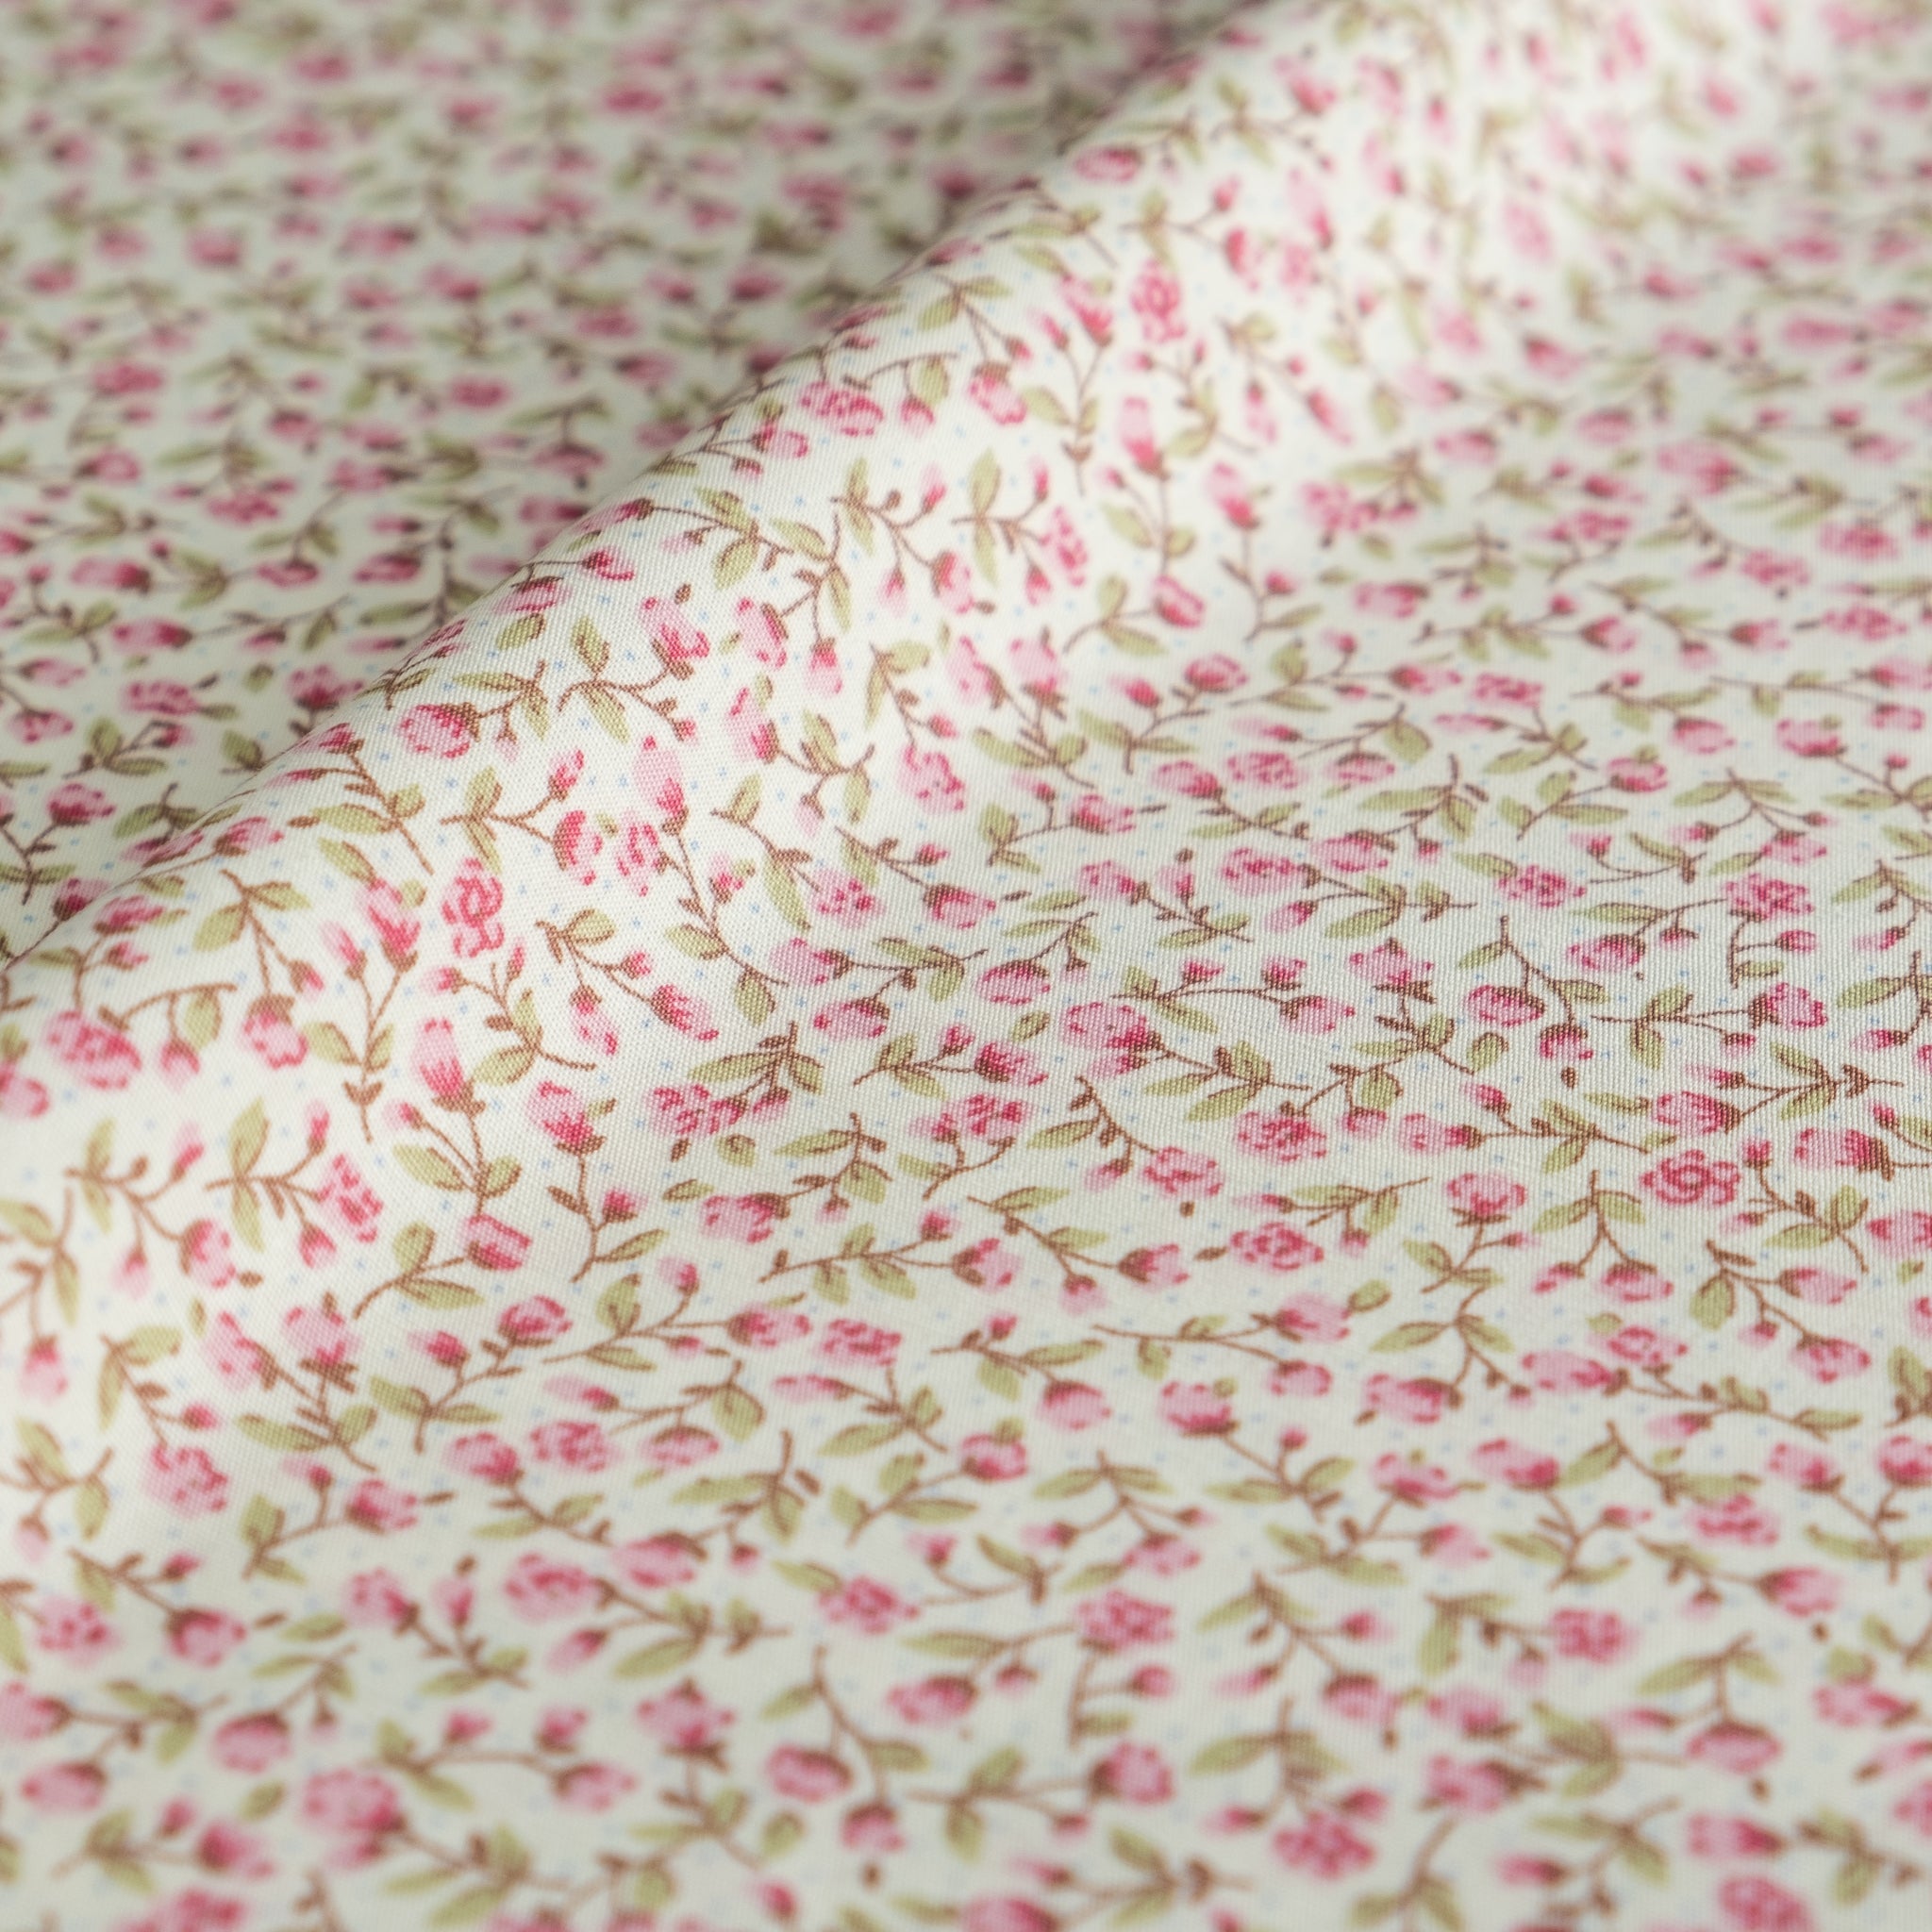 Pale Pink Ditsy Floral Fabric, 100% Cotton Poplin